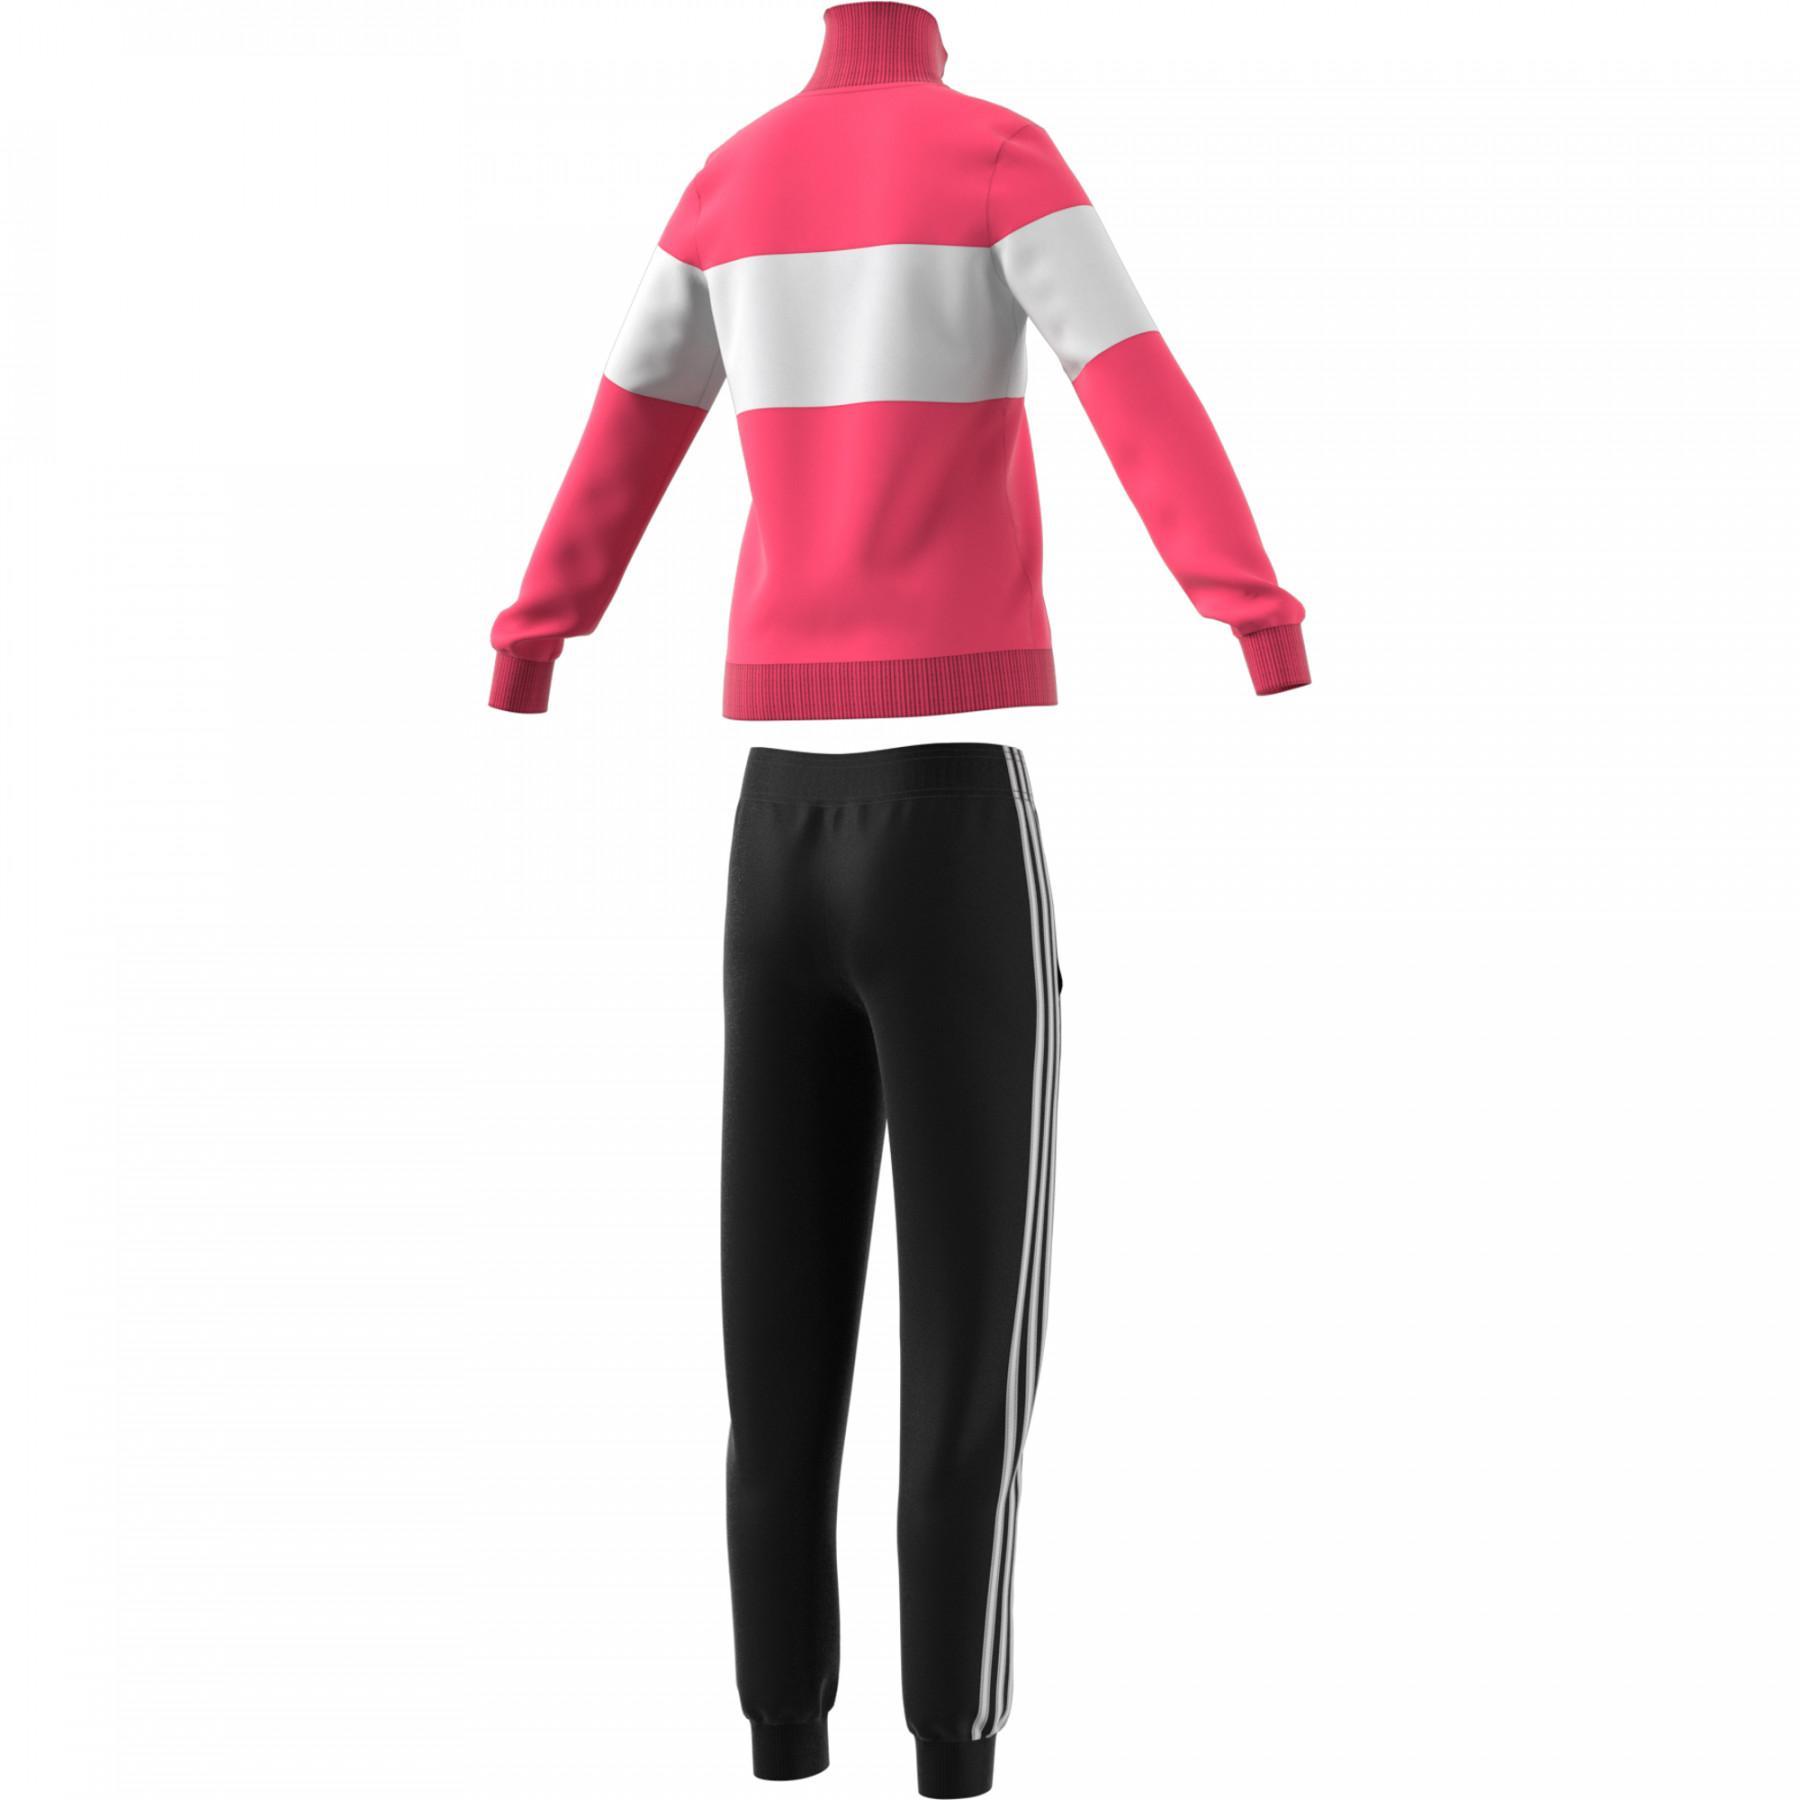 Women's tracksuit for children adidas Performance